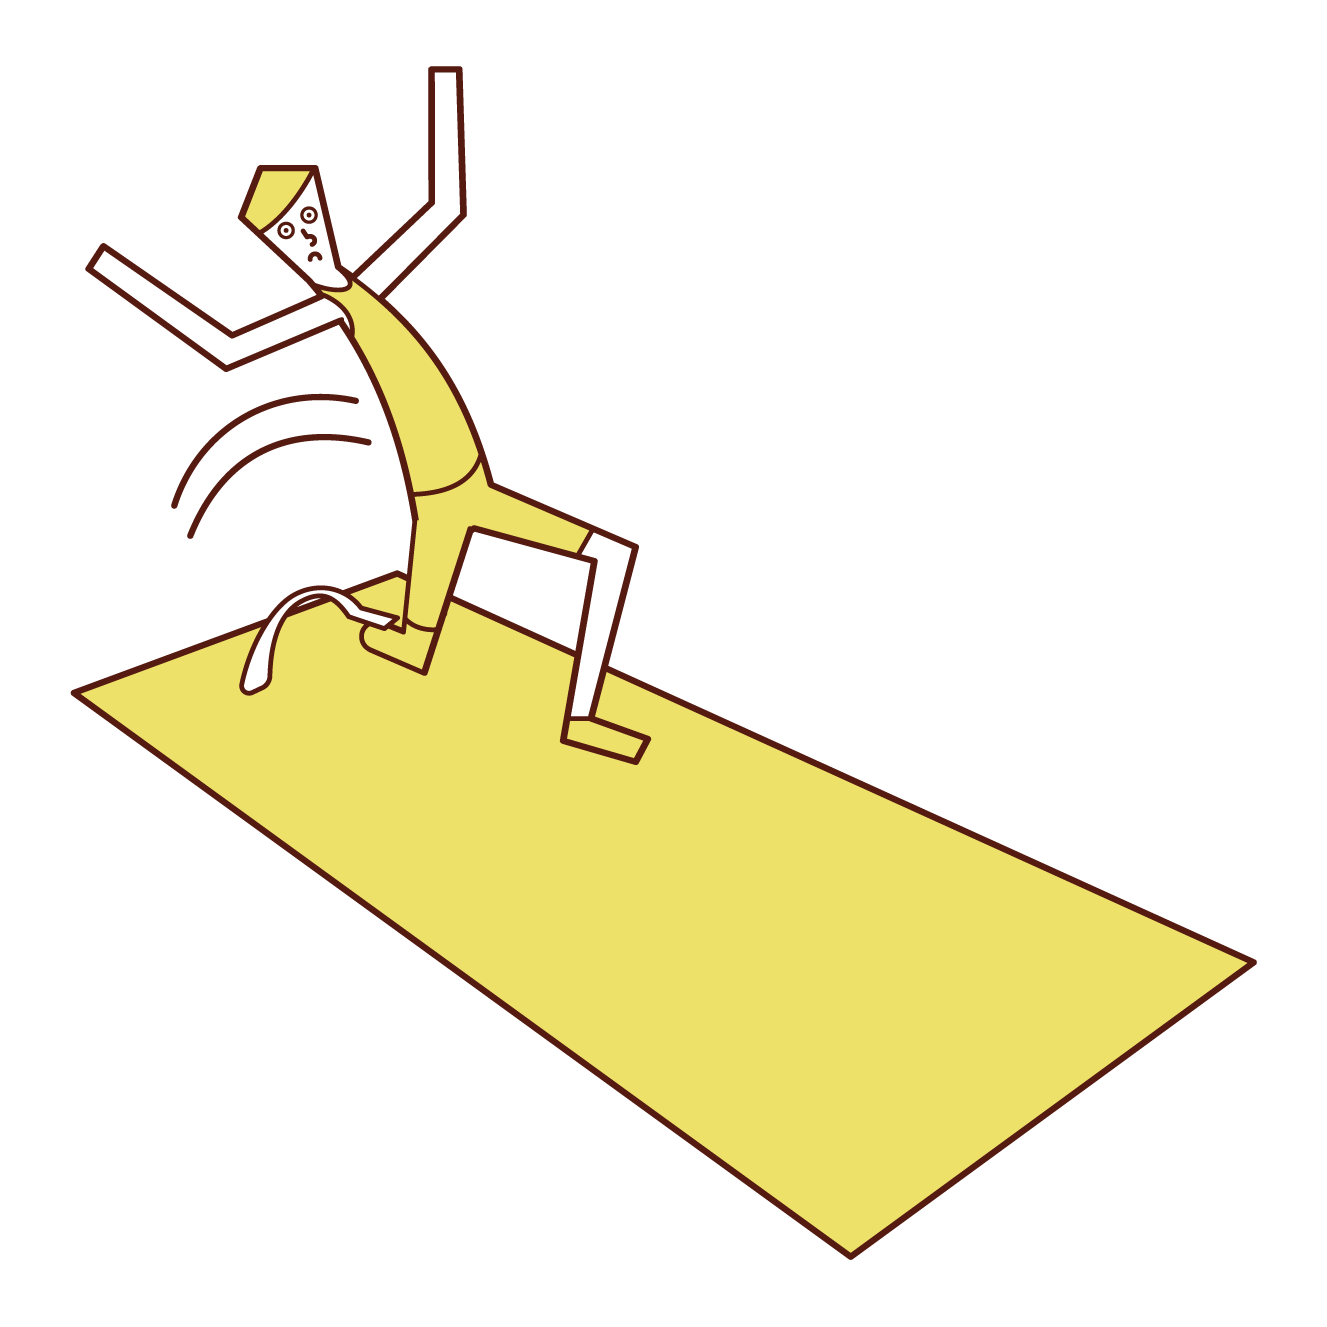 Illustration of a long jump player (man) with a prosthetic leg